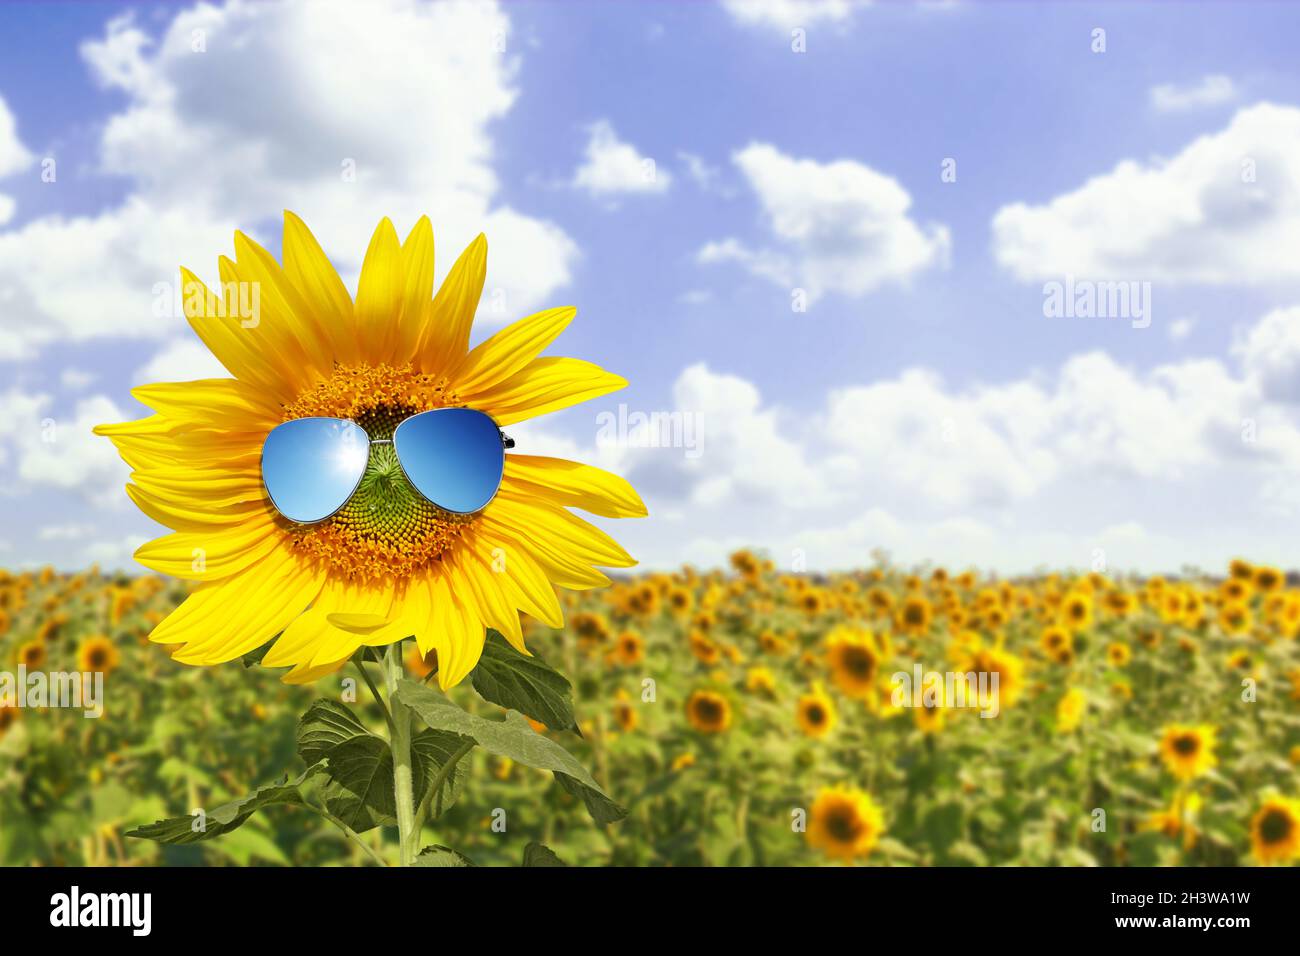 Funny sunflower with sunglasses on a blue sky Stock Photo